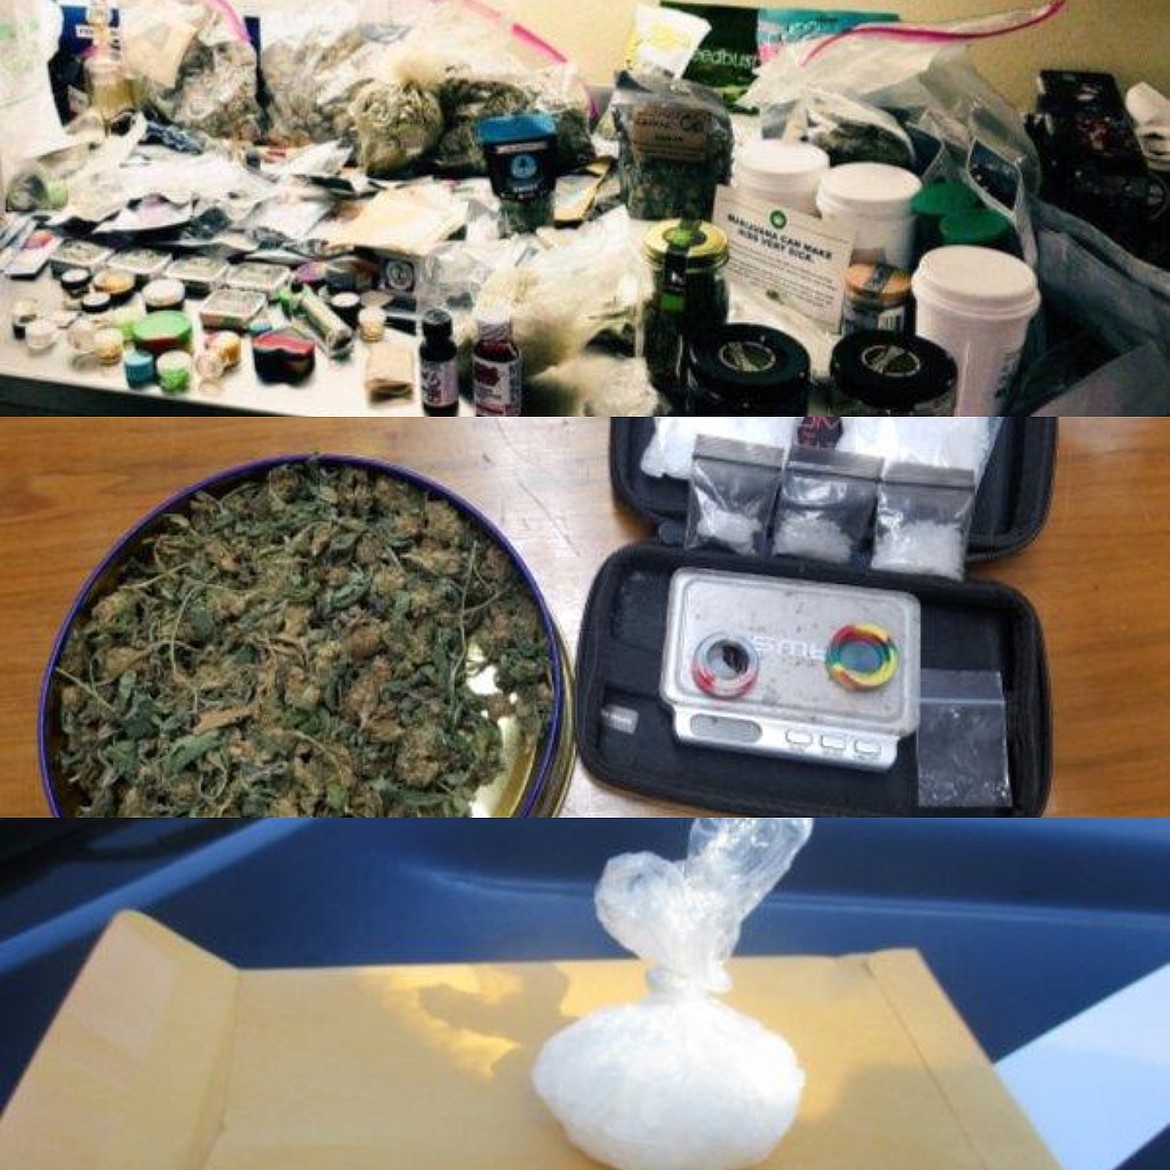 Courtesy photos/Several examples of drugs seized by SCSO and other law enforcement agencies with the help of Lulu in the past 7 months.(Top) Various amounts of illegal substances seized during an ISP emphasis, with the help of Lulu.(Middle) A sizable amount of marijuana, methamphetamine, and paraphernalia found by Lulu.(Bottom) Methamphetamine recovered from a traffic stop Lulu was apart of.